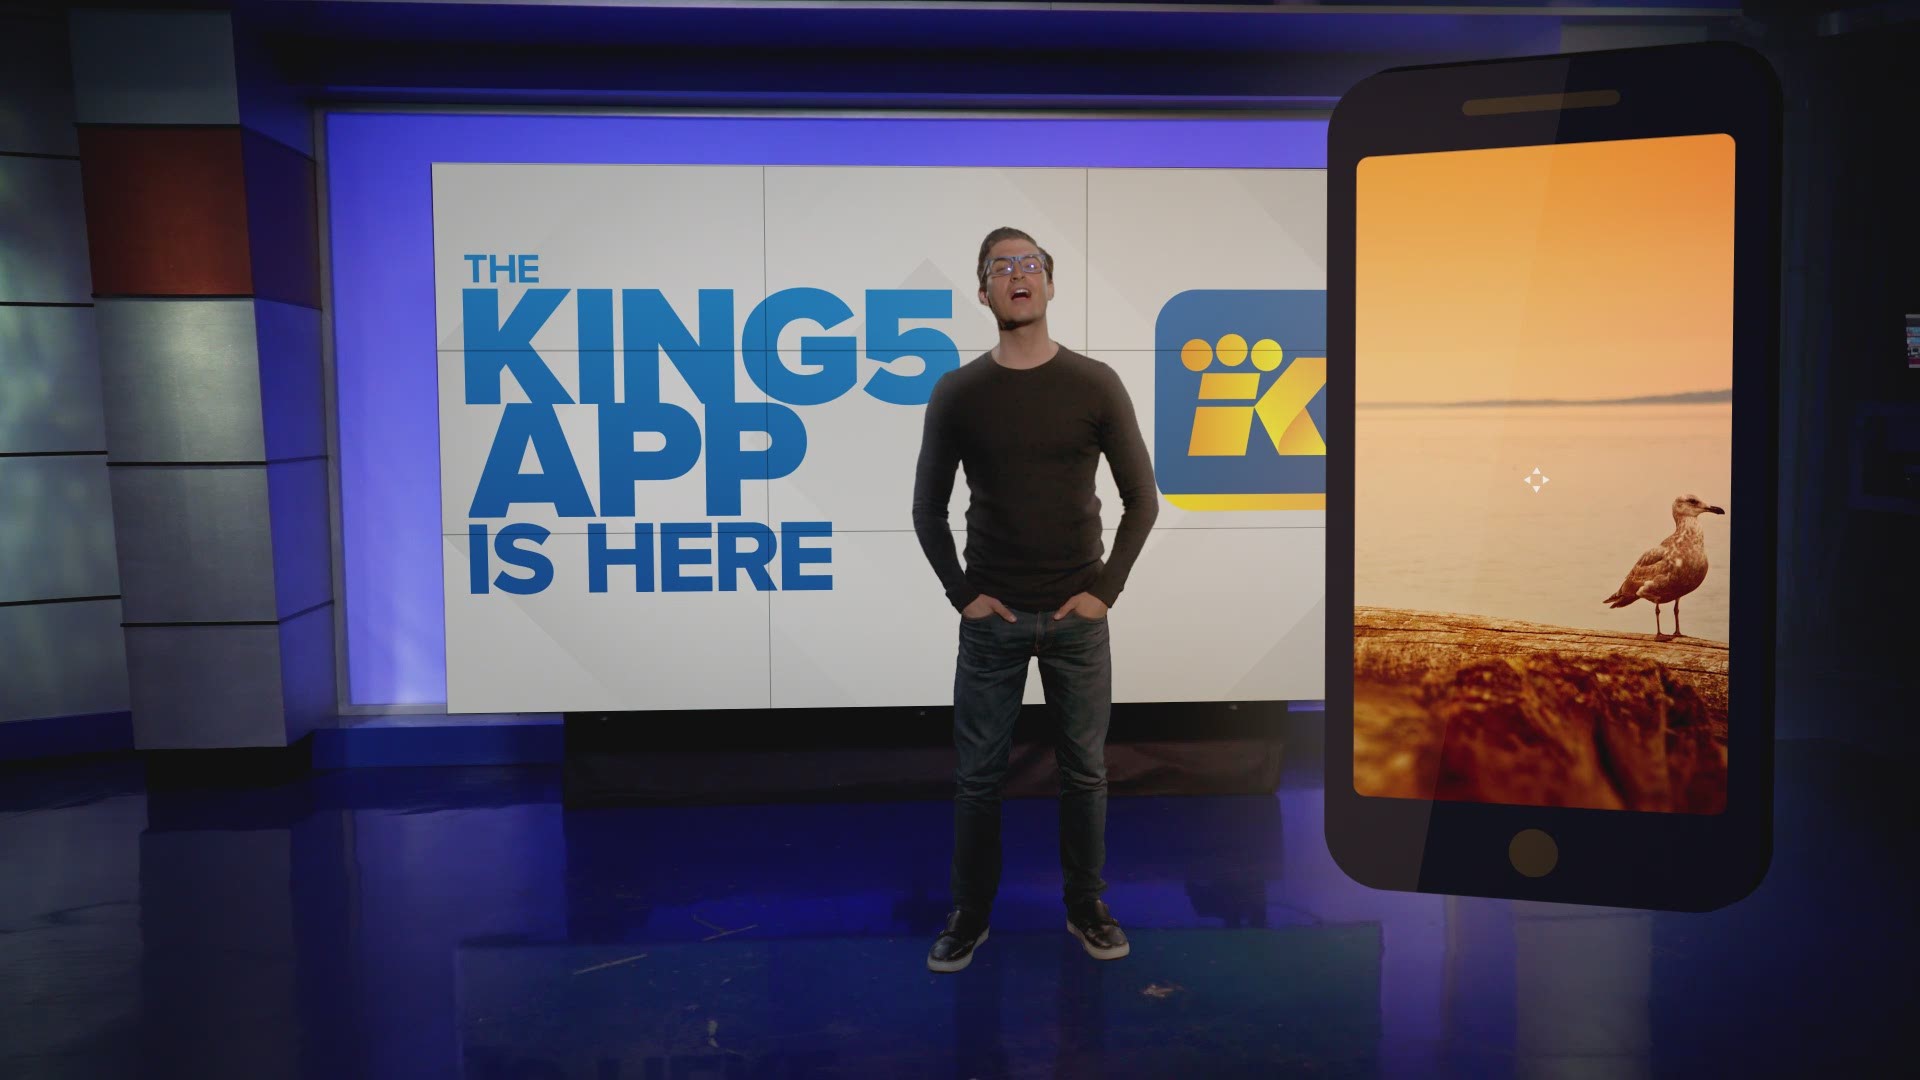 It's time to download the all-new KING 5 app, designed with YOU in mind.